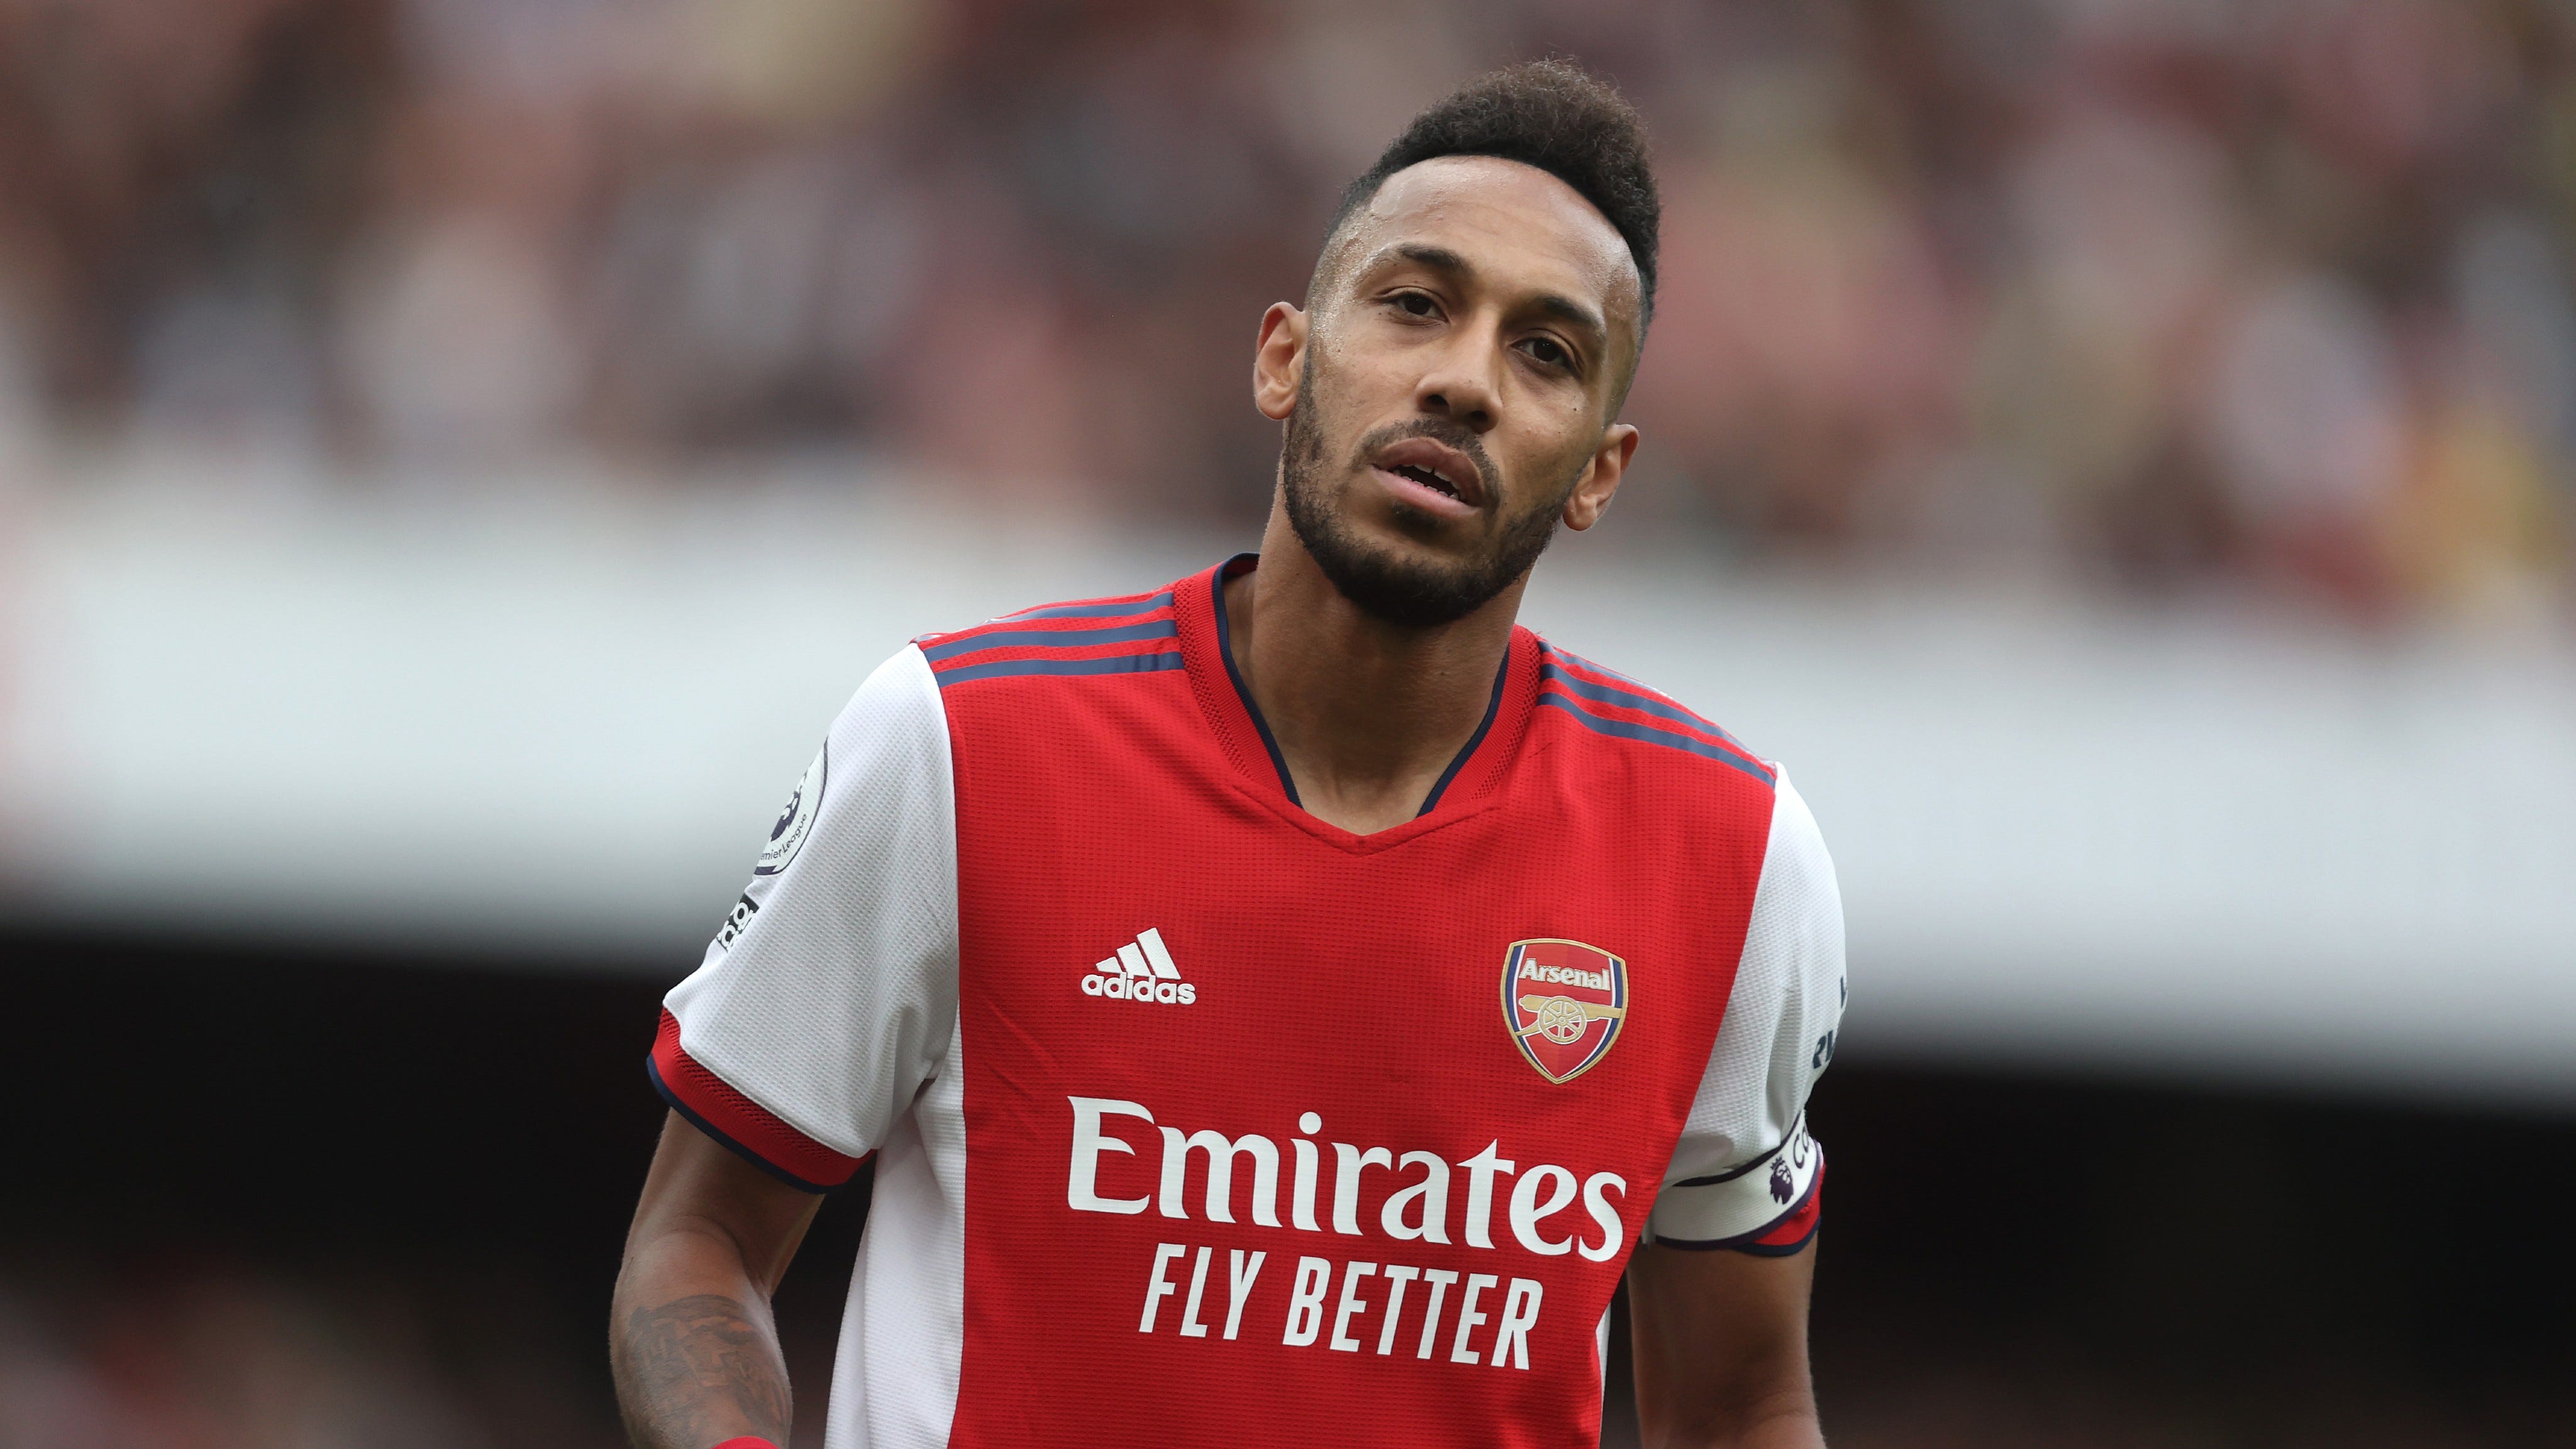 Mikel Arteta defends role in Pierre-Emerick Aubameyang fall-out at Arsenal